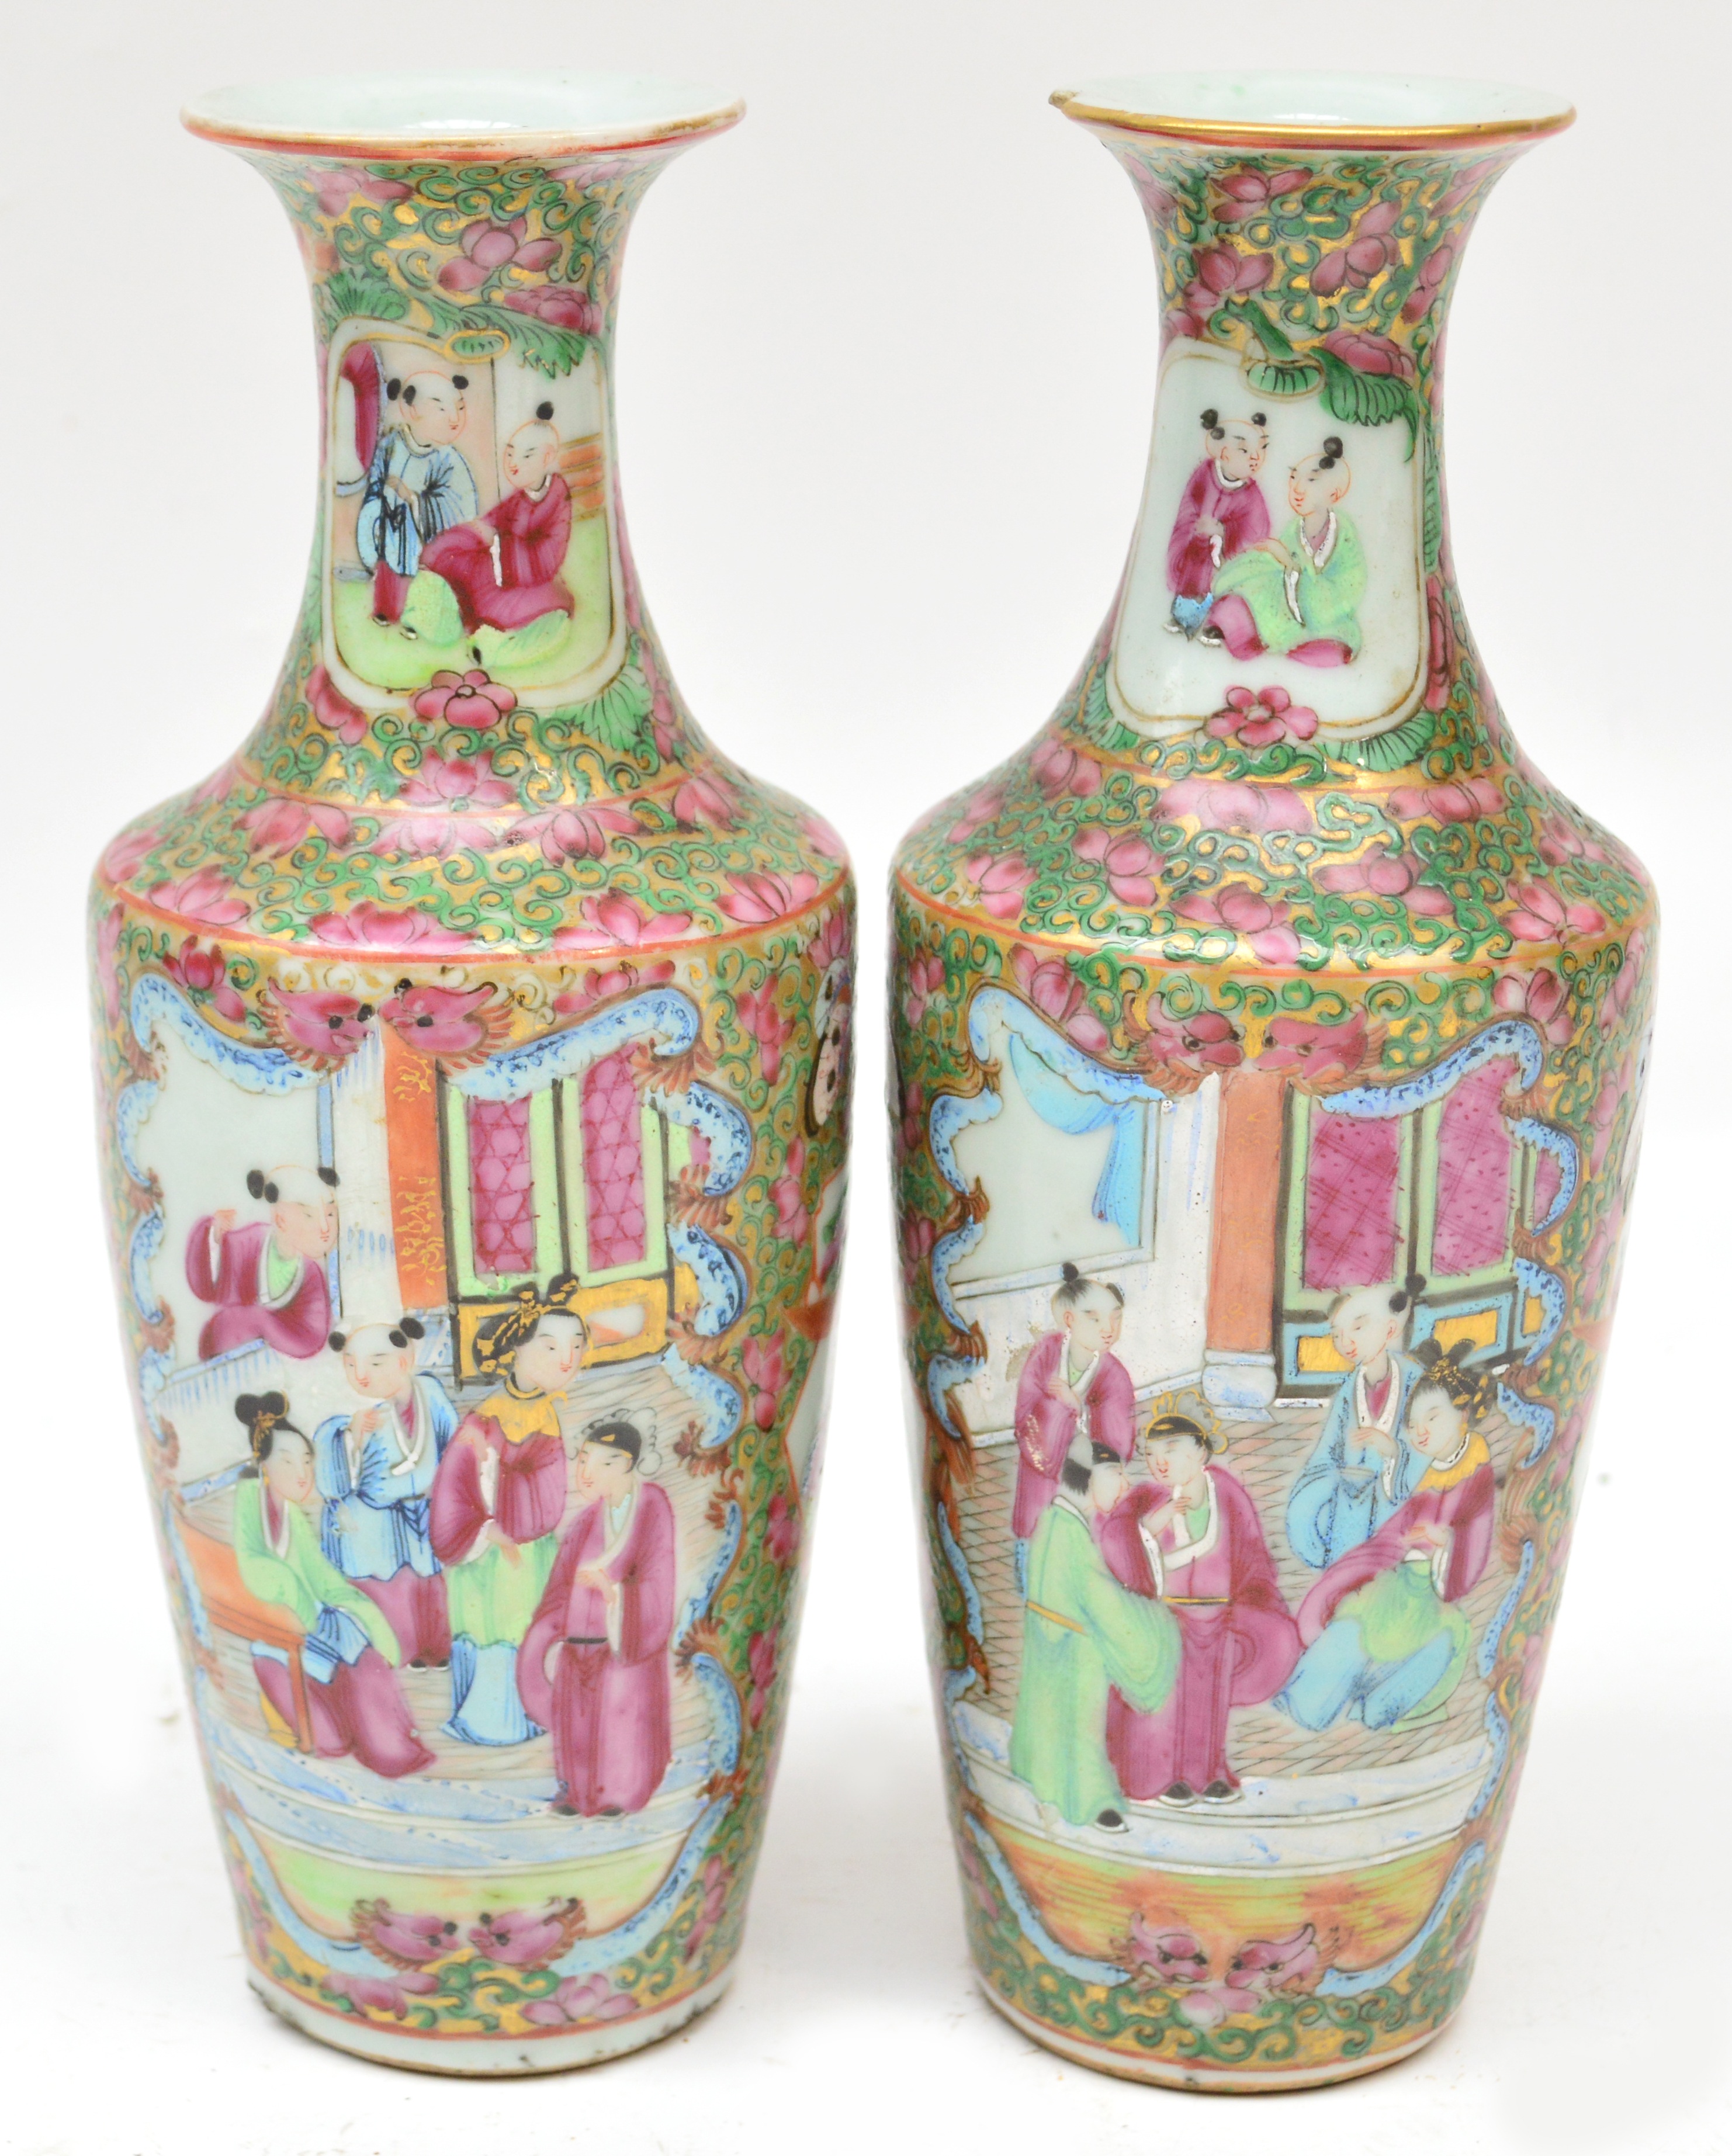 A pair of 19th century Chinese Canton porcelain baluster vases with slender necks and flared rim,